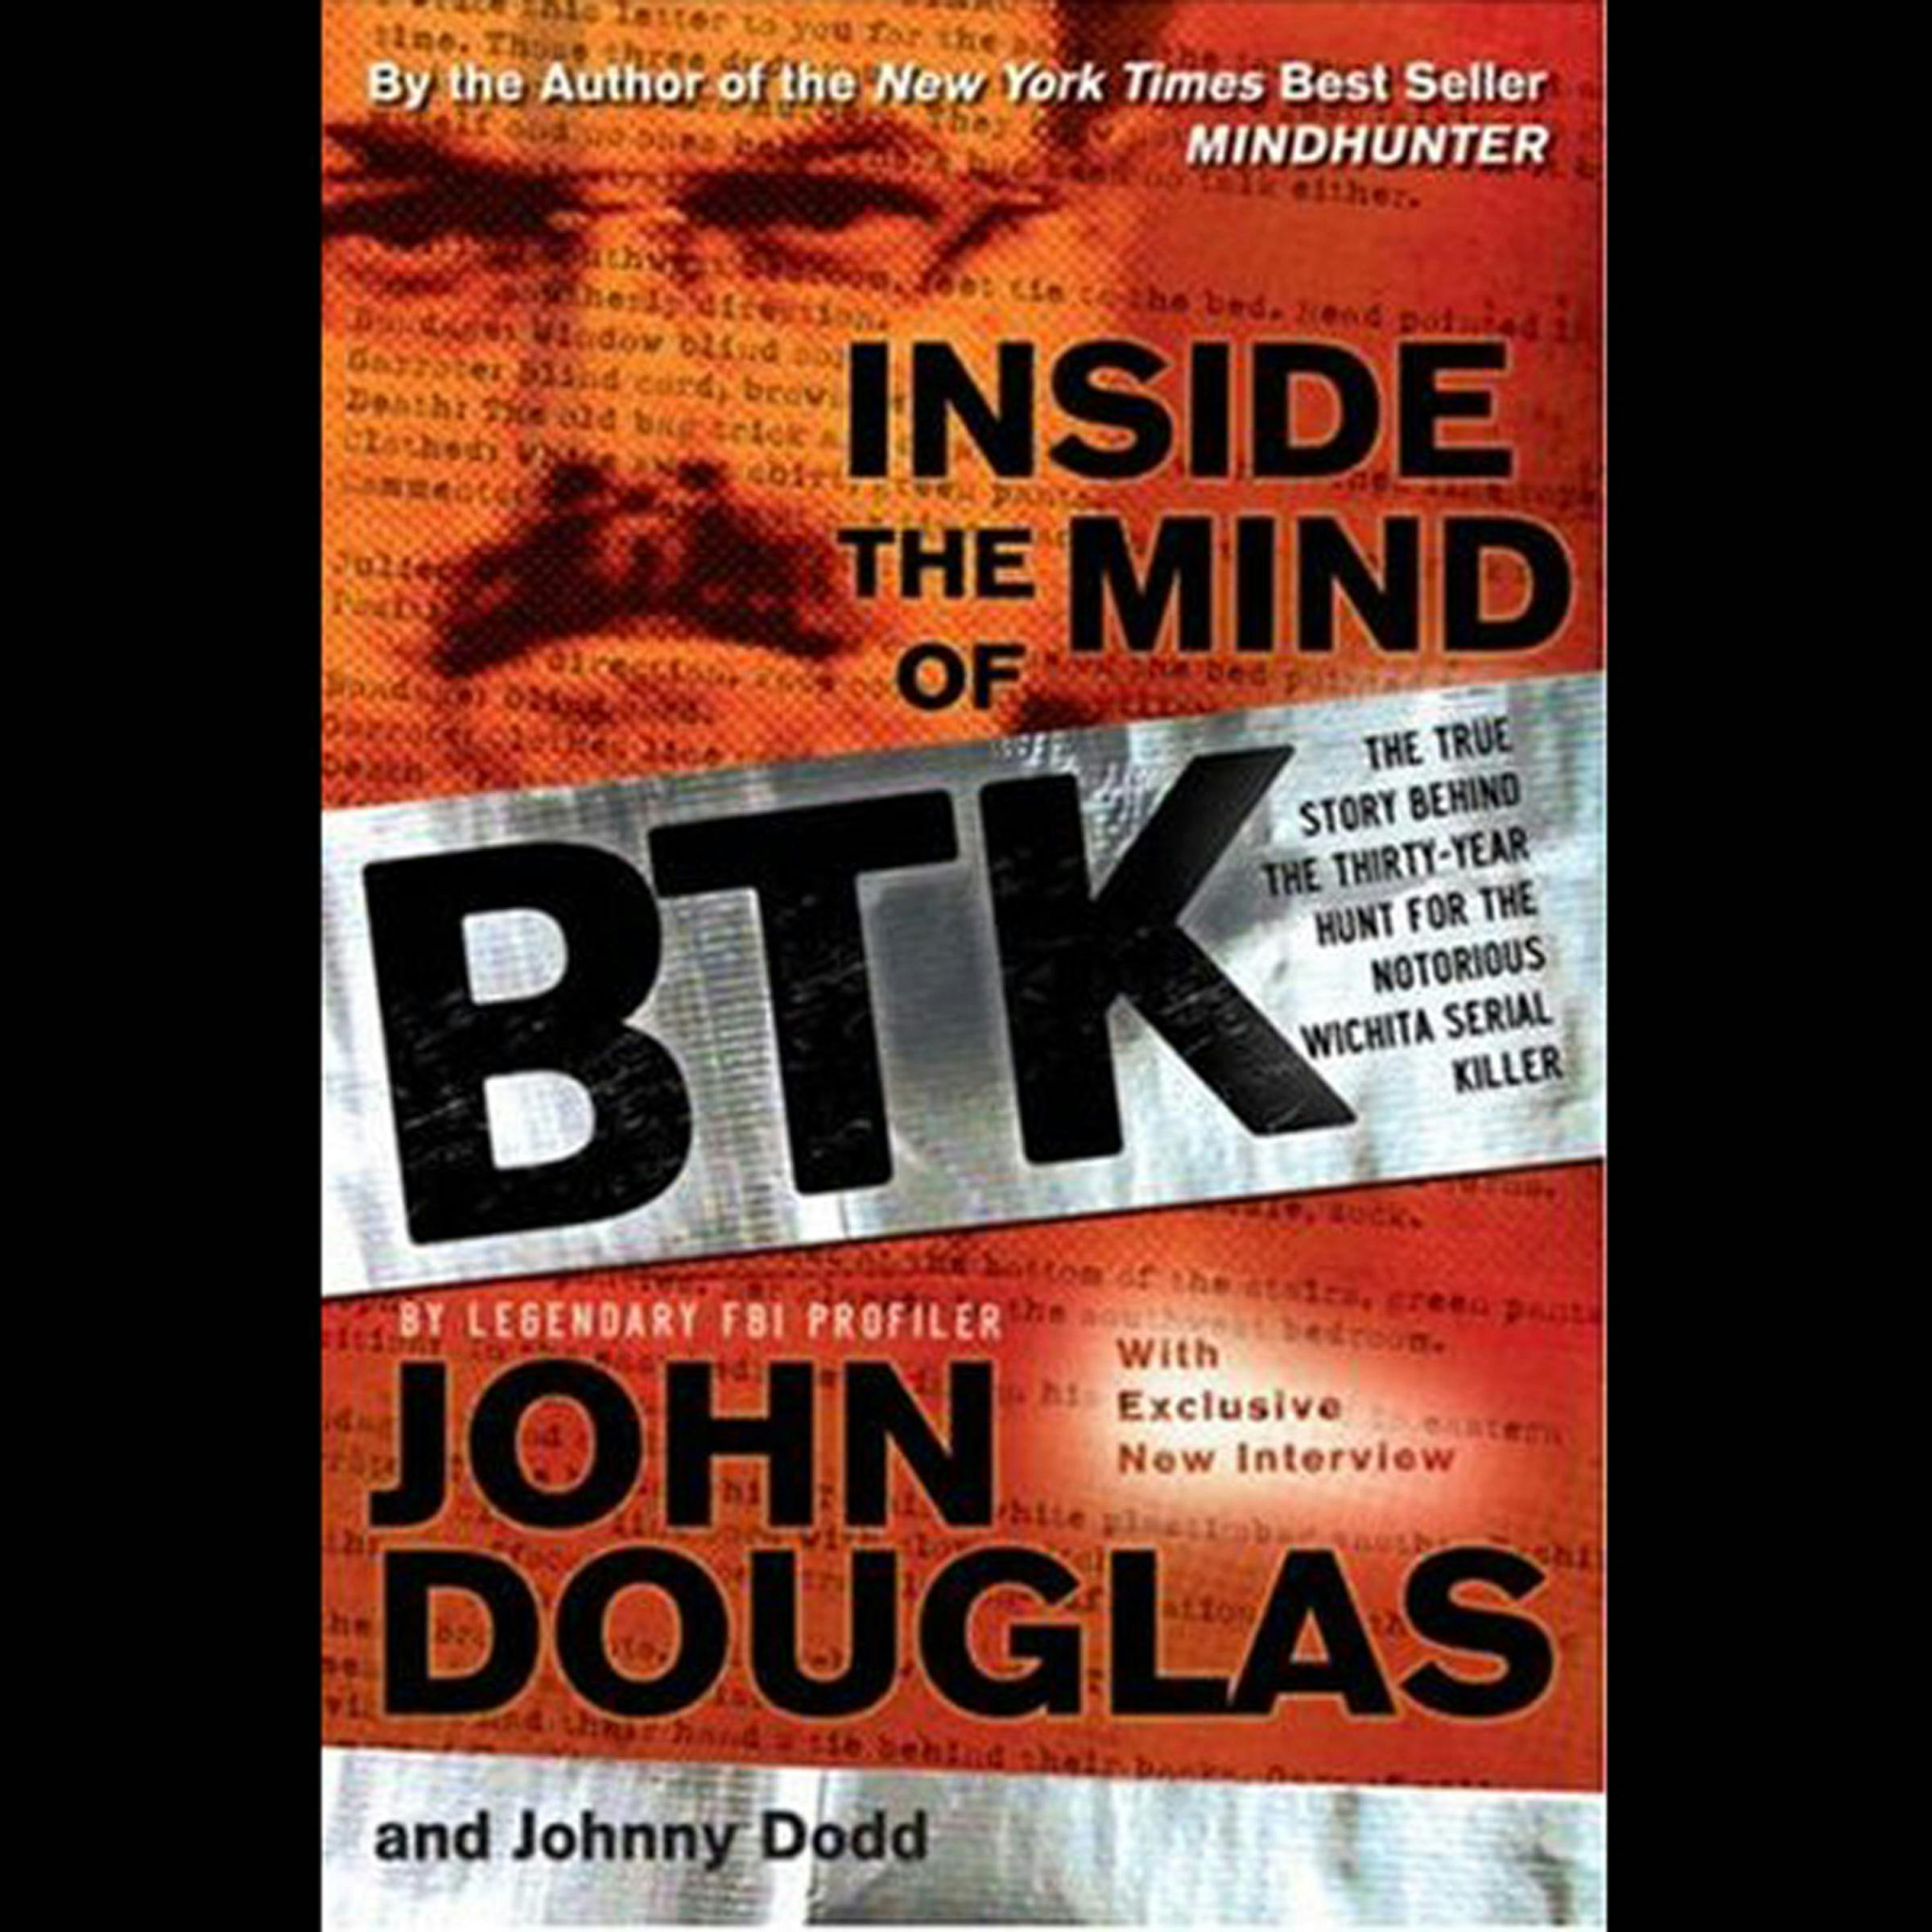 Inside the Mind of BTK: The True Story Behind the Thirty-Year Hunt for the Notorious Wichita Serial Killer - John E. Douglas, Johnny Dodd